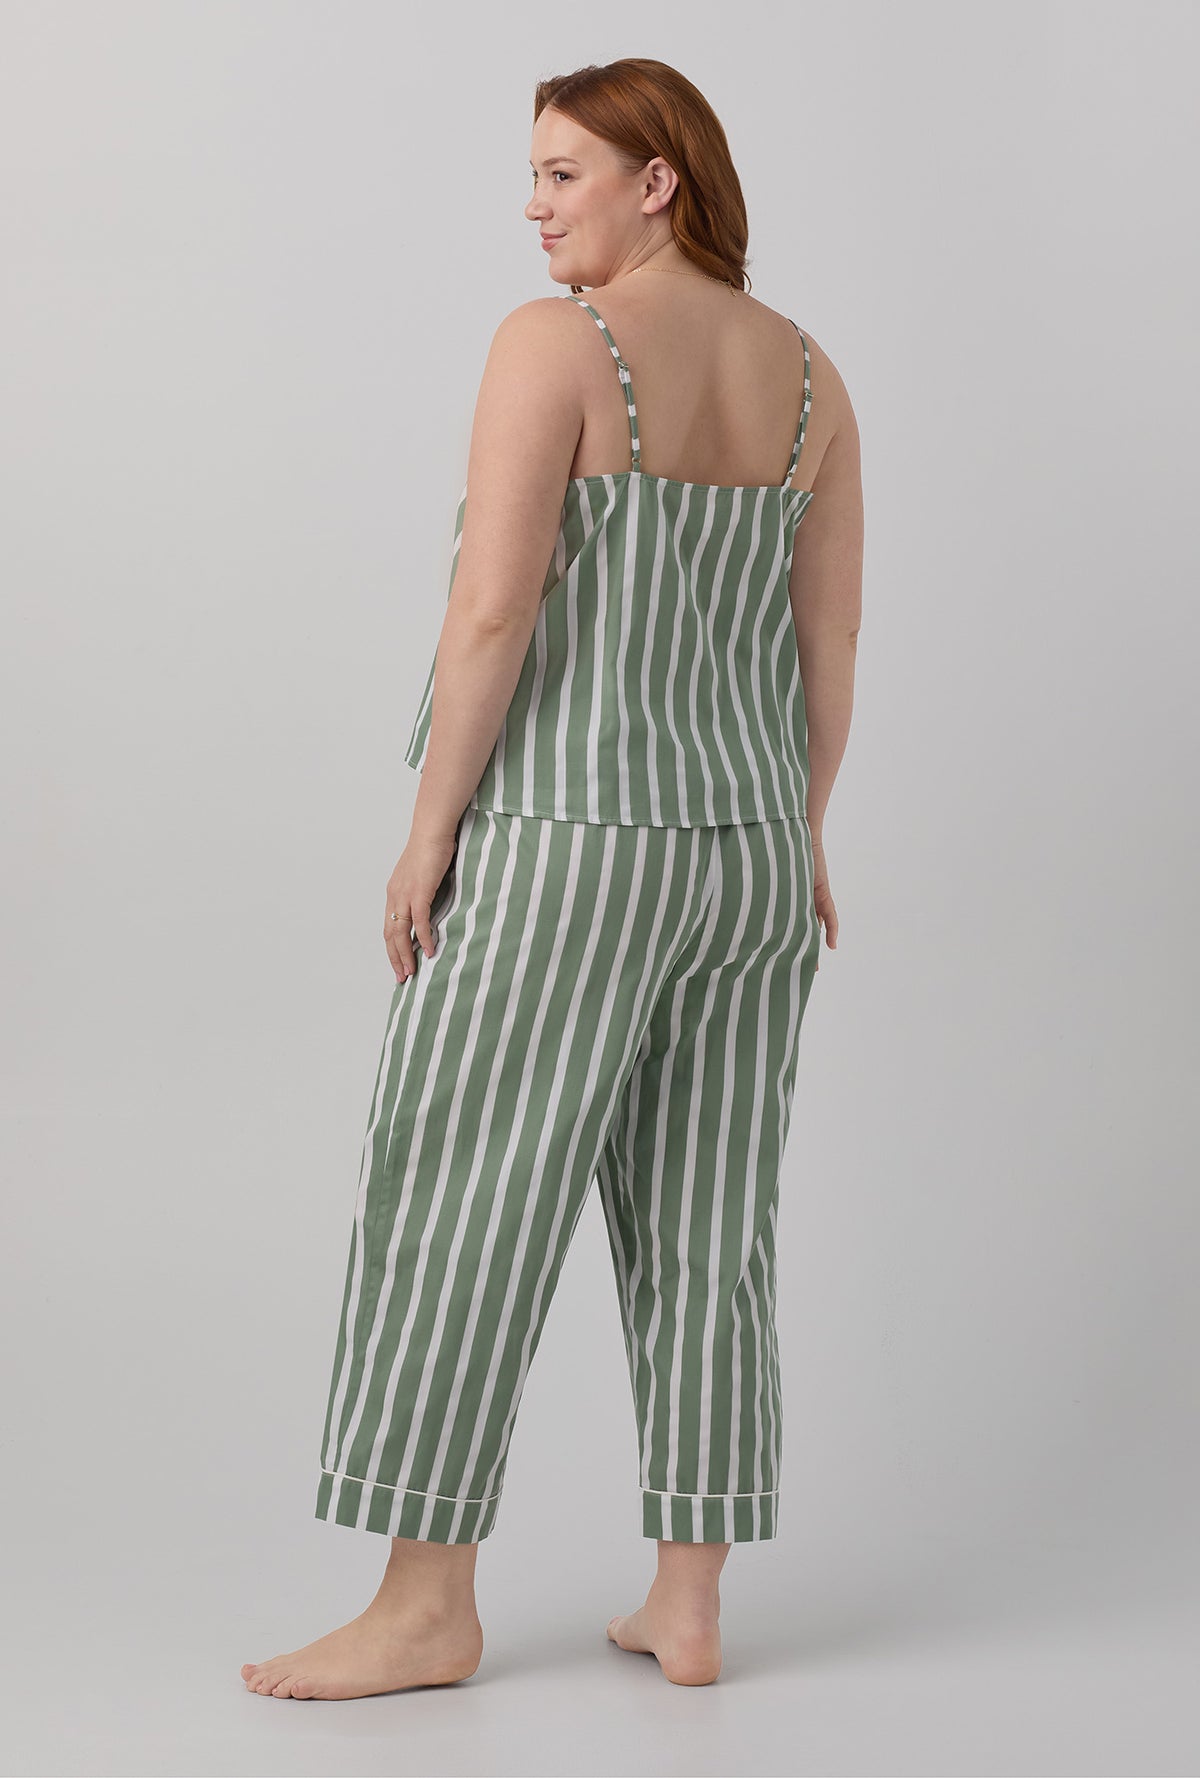 A lady wearing plus size green Woven Cotton Sateen Cropped PJ Set with North Shore Stripe print.